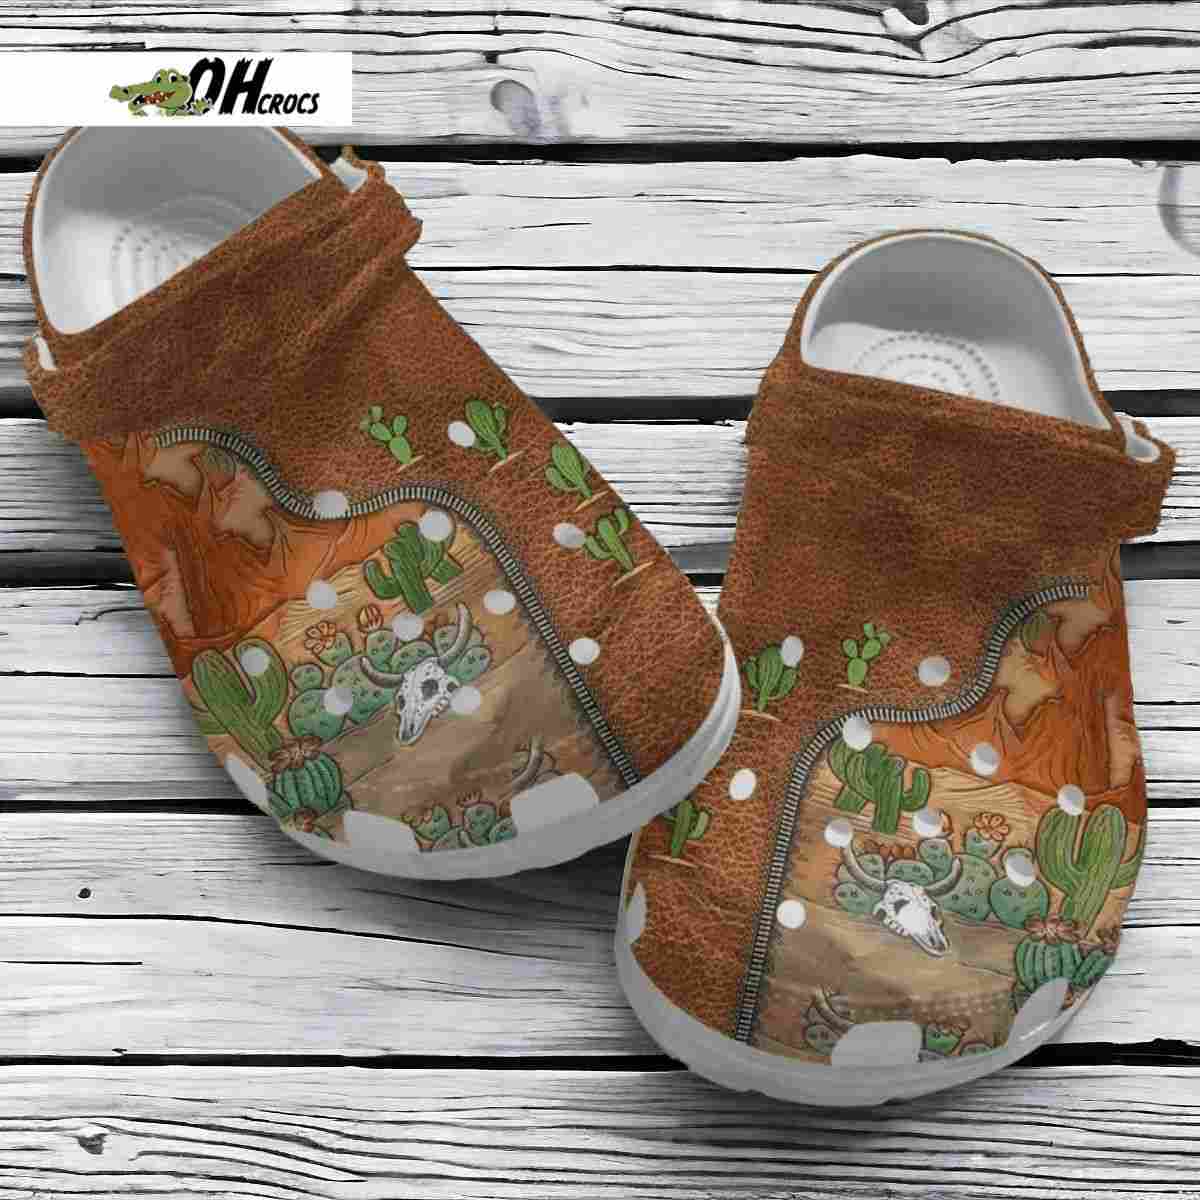 Cactus Skull With Zipper Leather Patternss For Cactus Lovers Crocs Clog Shoes Gift